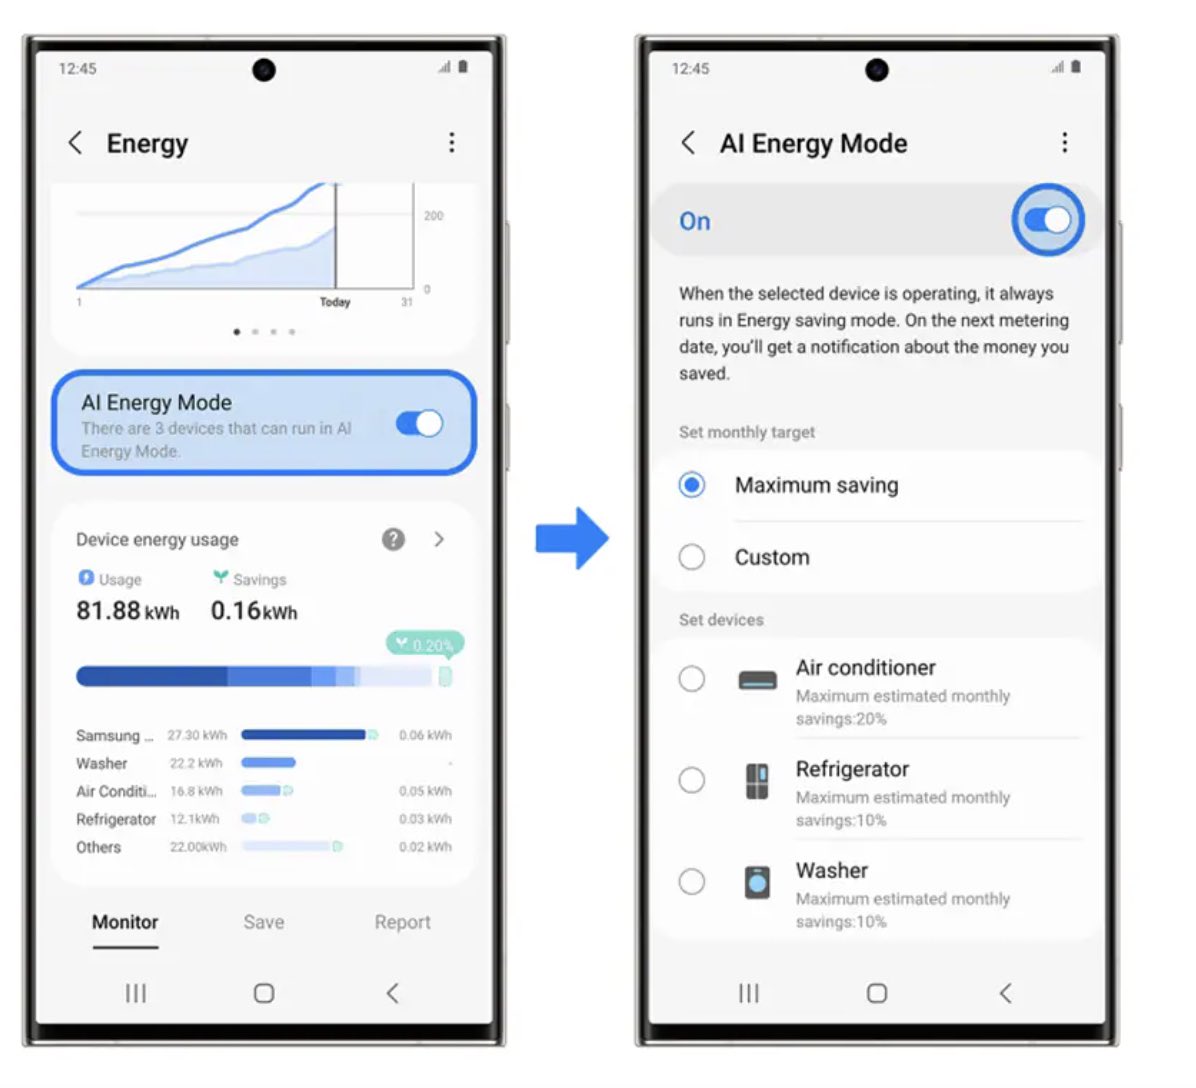 #SmartThings Energy’s AI Energy Mode helps users save energy and accompanying costs intelligently. It learns the users’ home energy patterns, guides them on how to be more efficient and estimates bills. Learn more at partners.smartthings.com/smartthings-en…